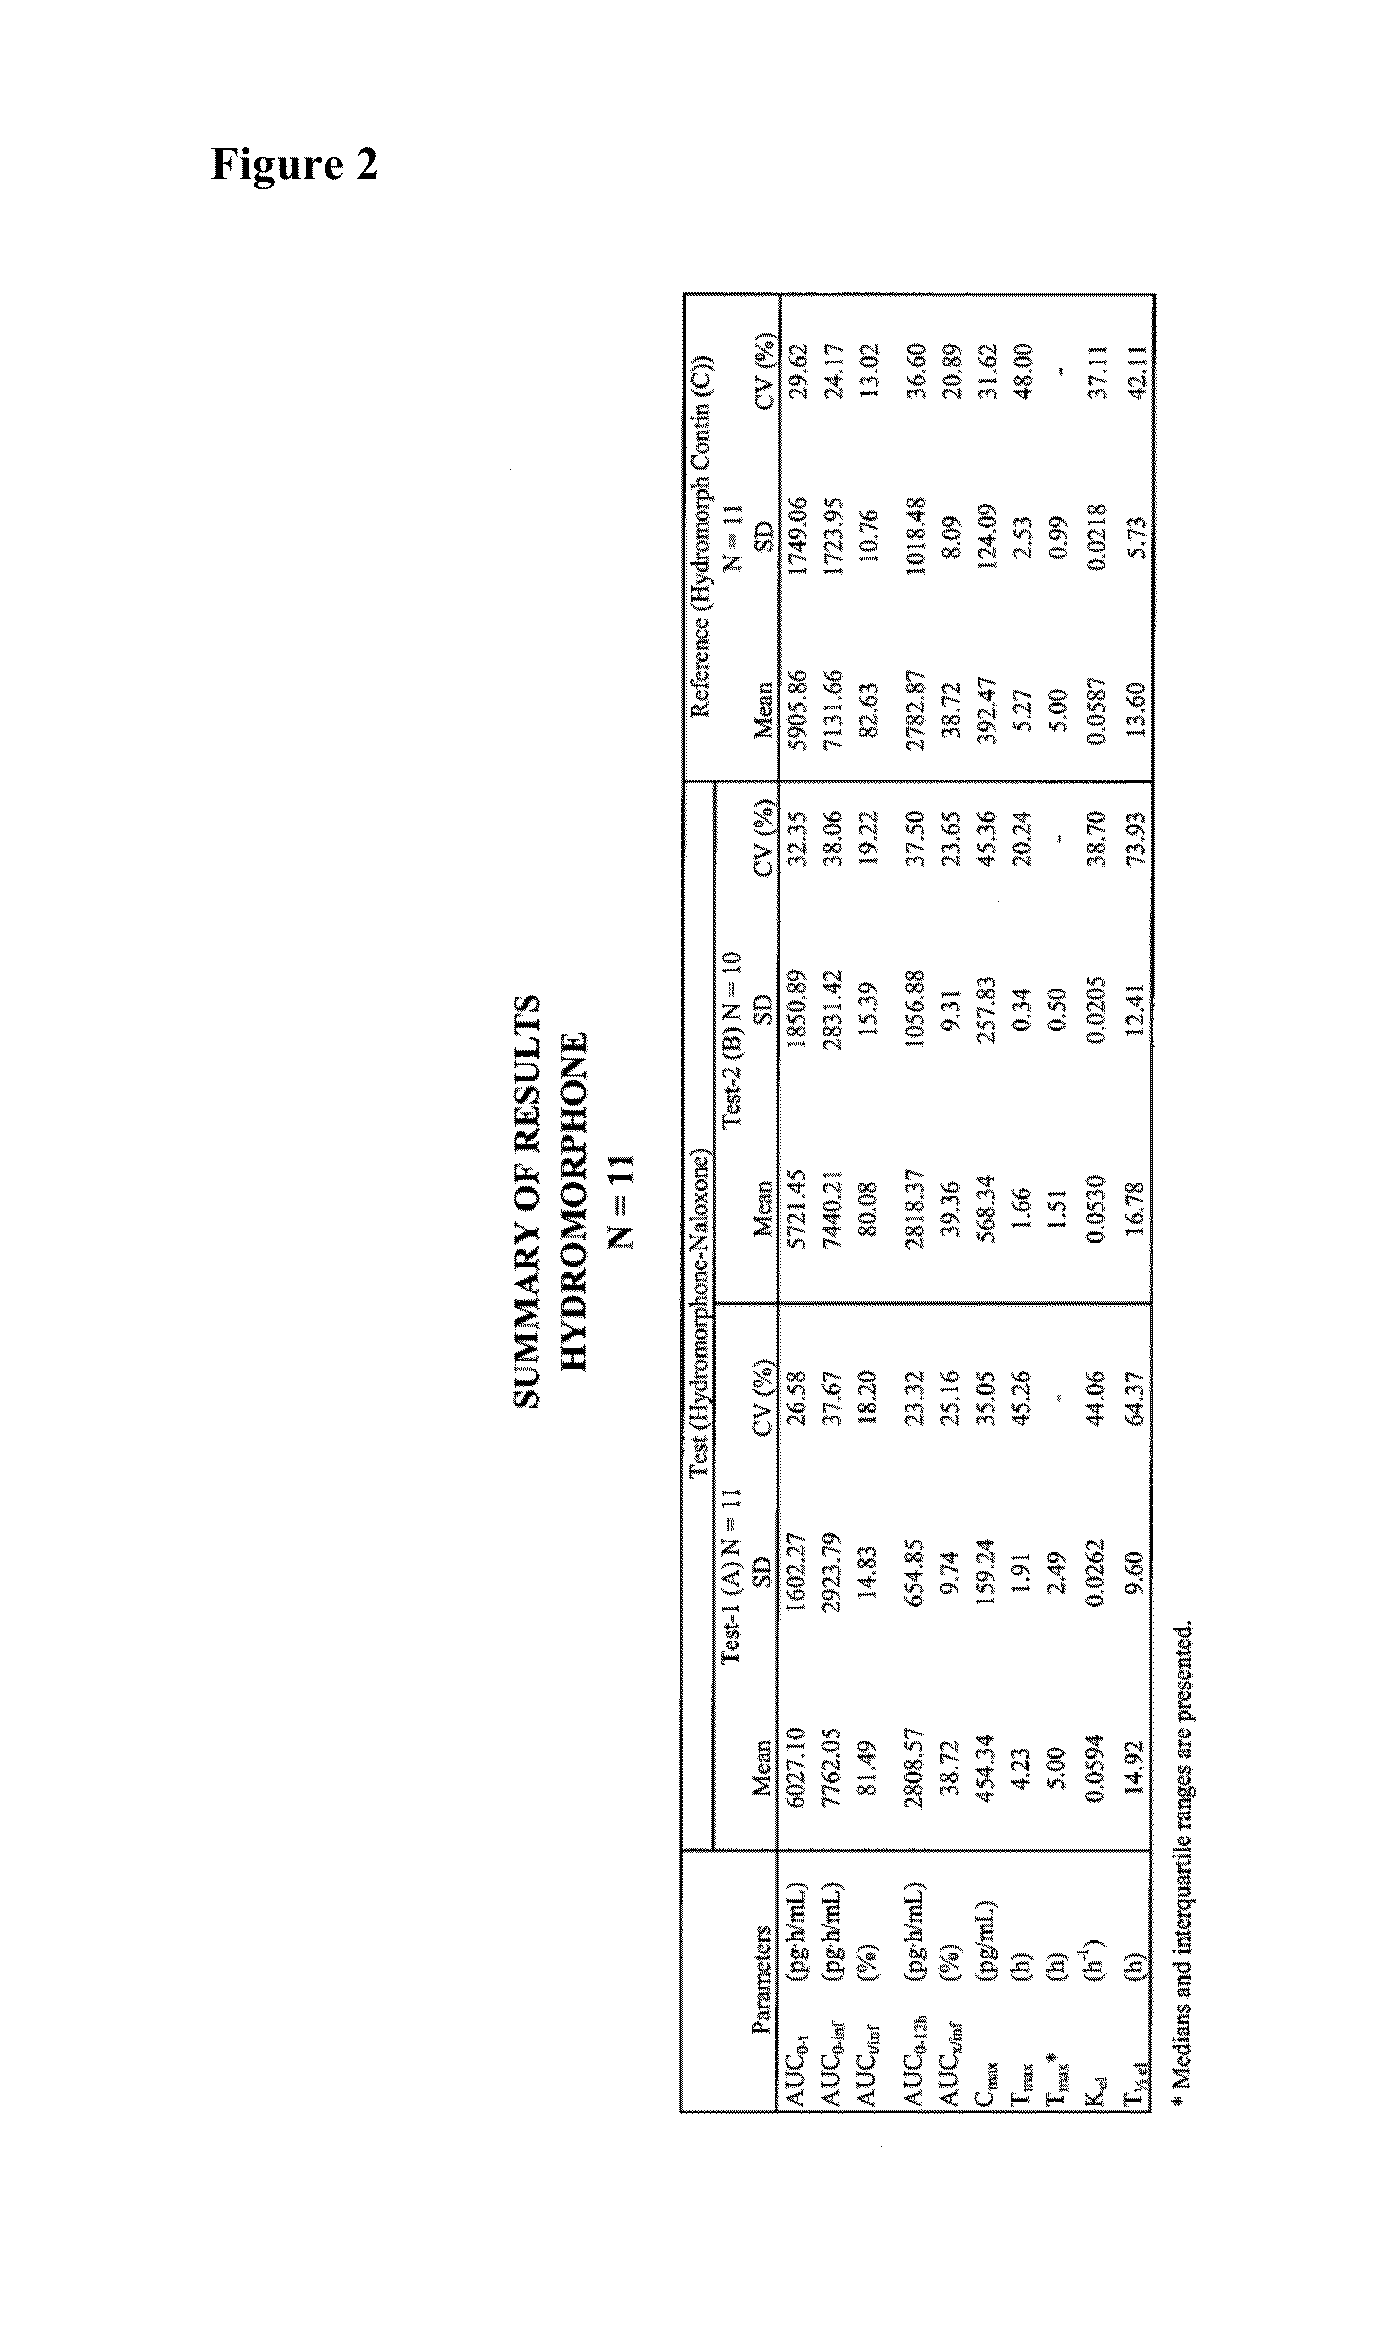 Pharmaceutical compositions comprising hydromorphone and naloxone